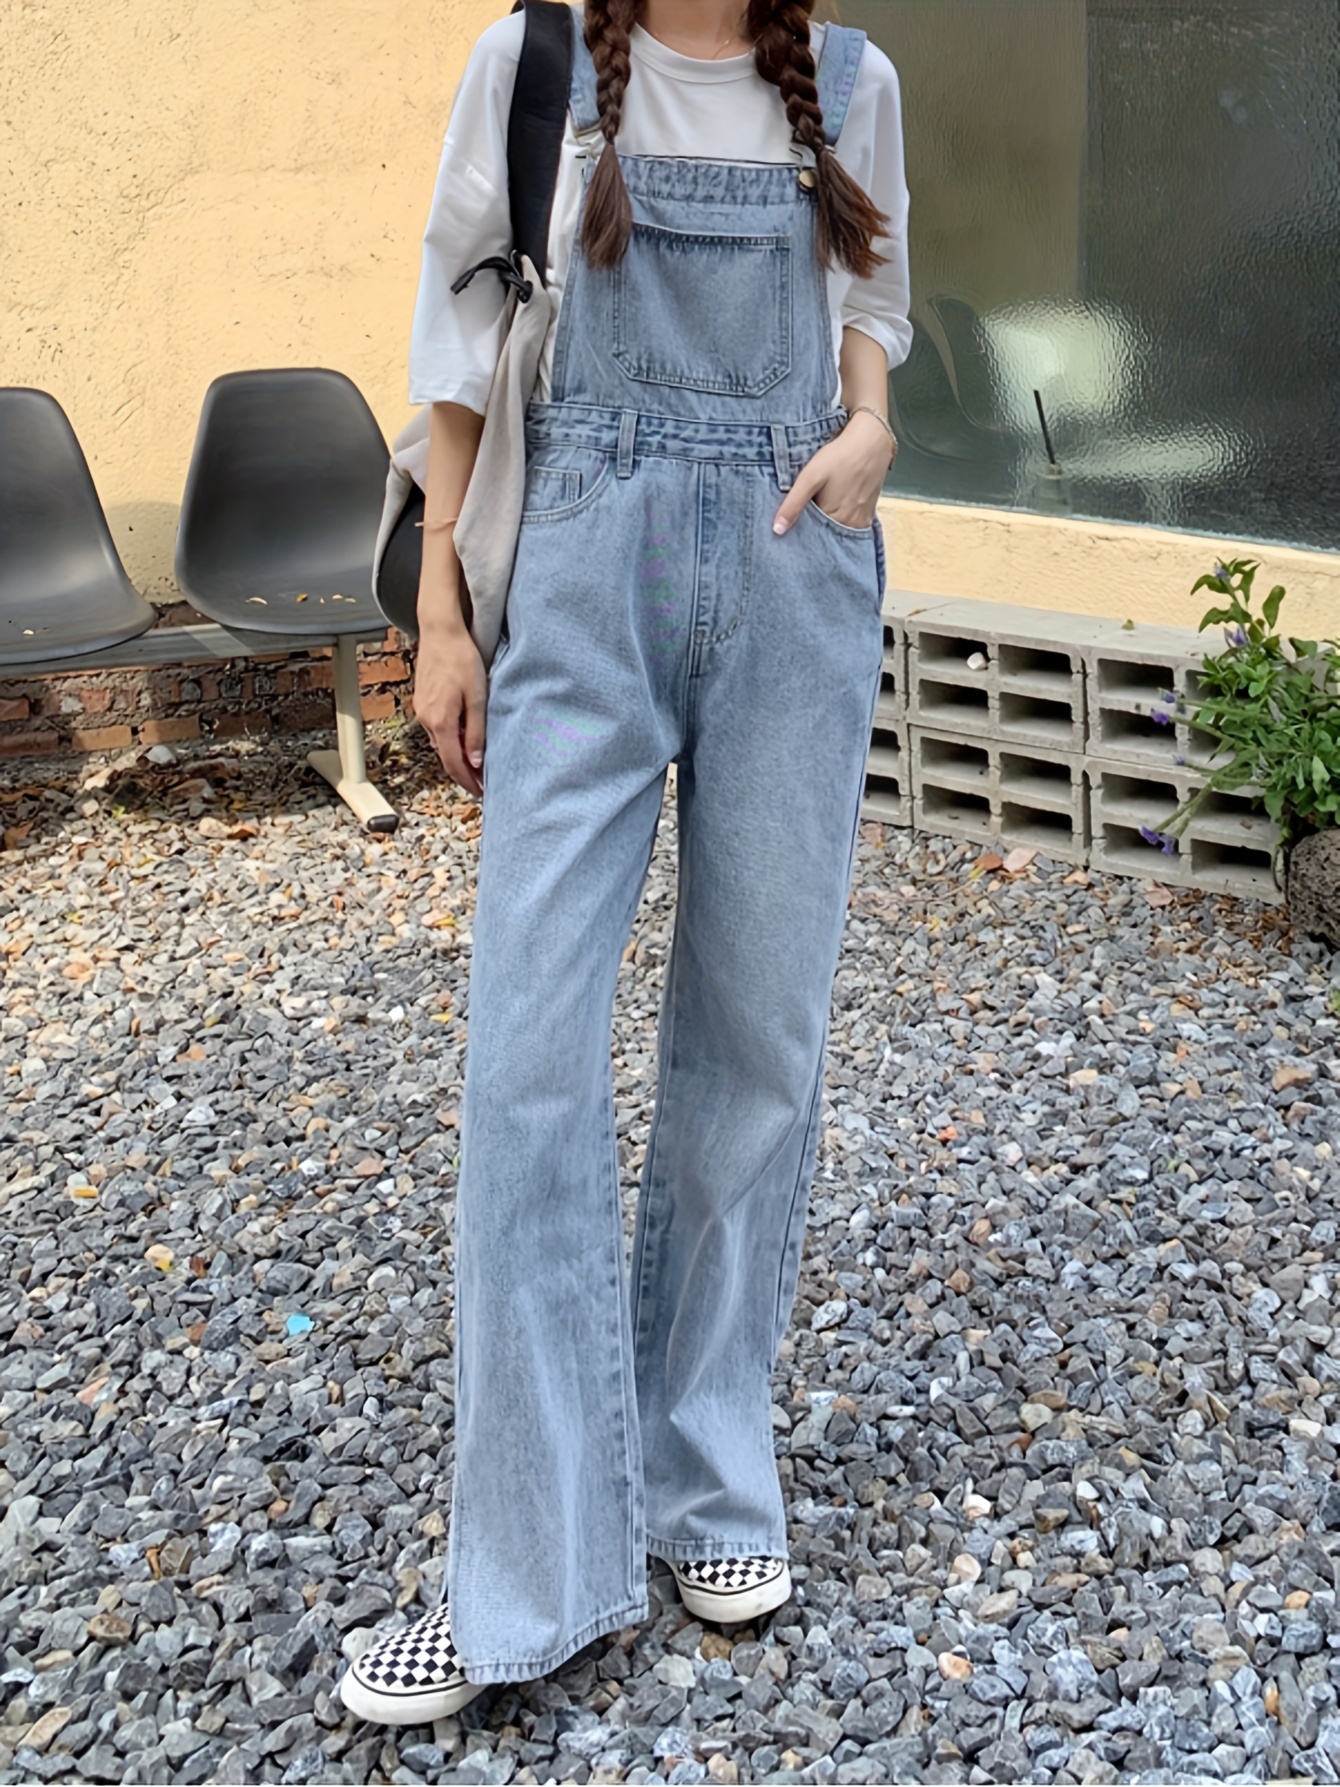 Frontwalk Mens Denim Work Overalls Casual Relaxed Fit Jumpsuits